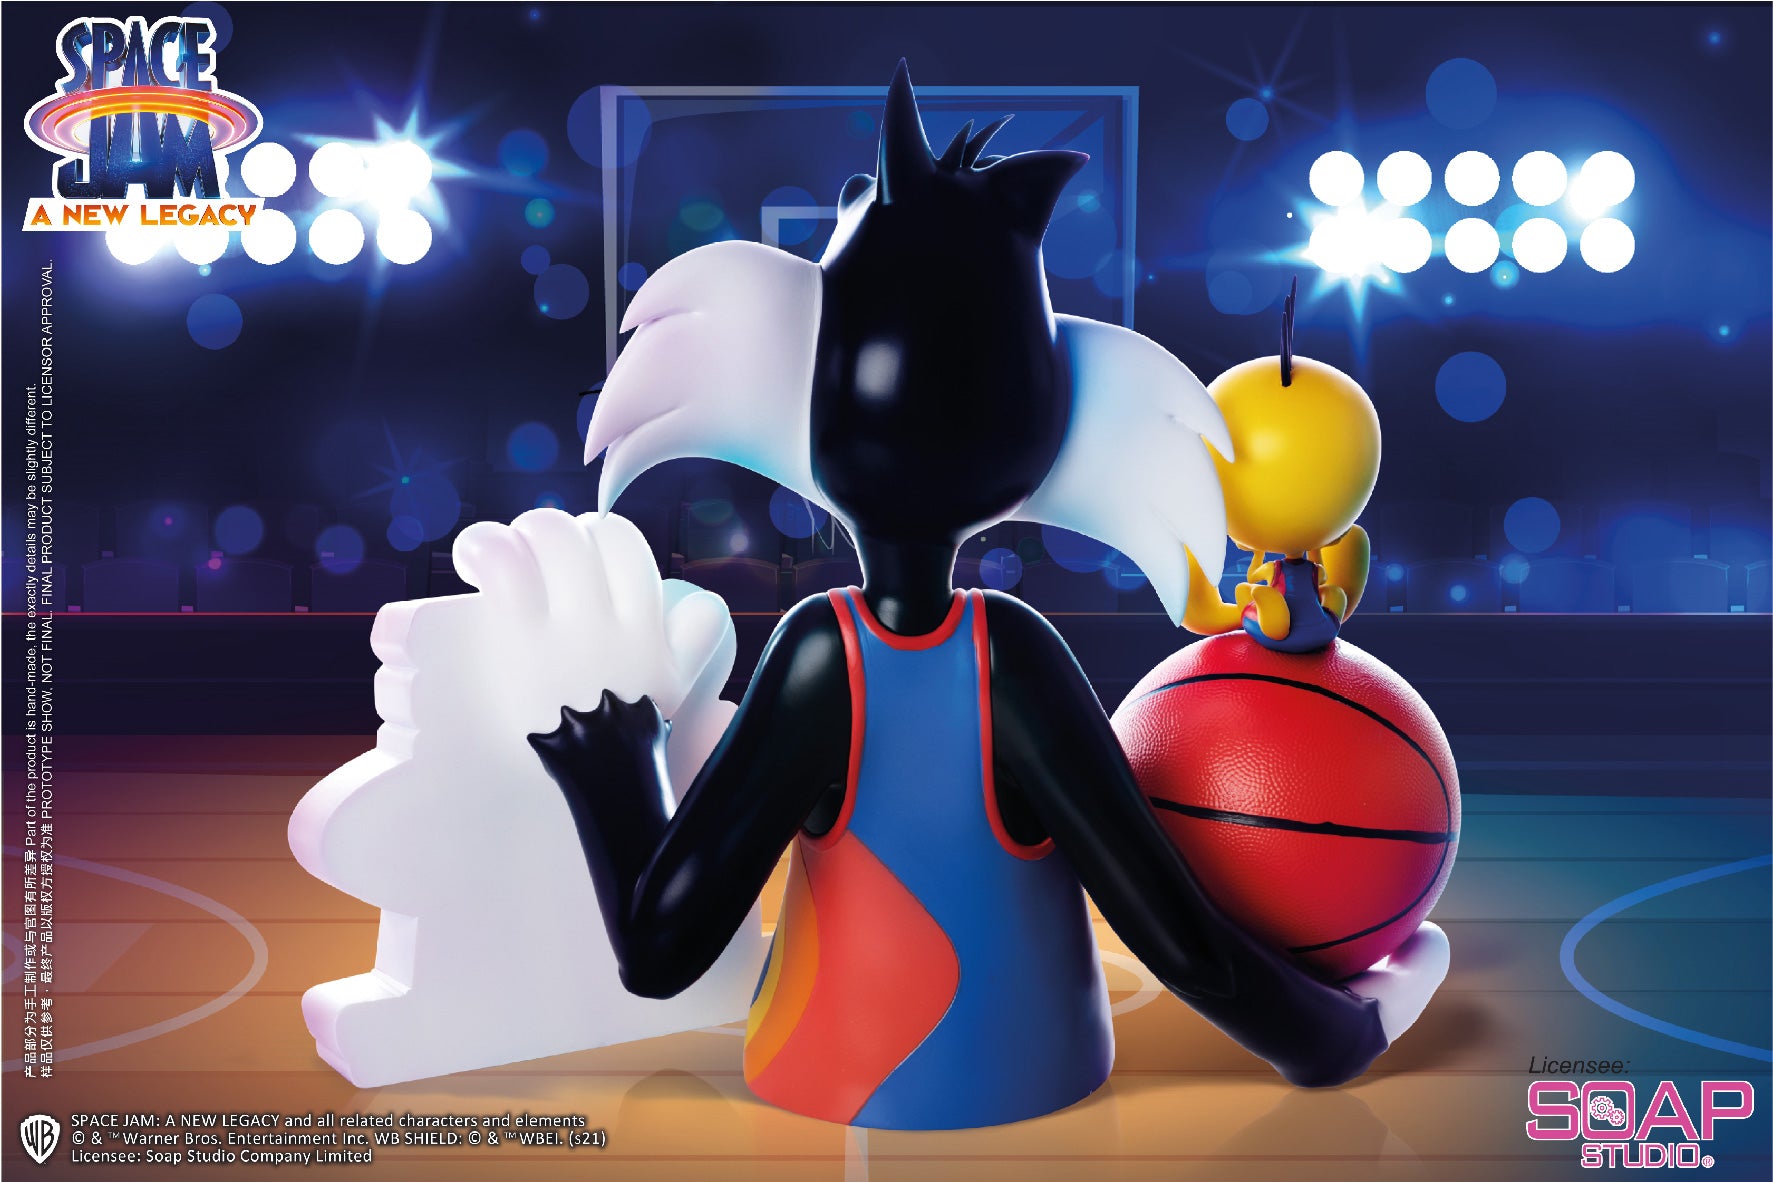 Soap Studio CA183 Space Jam 2 A New Legacy: Sylvester & Tweety Bust Figure Statue